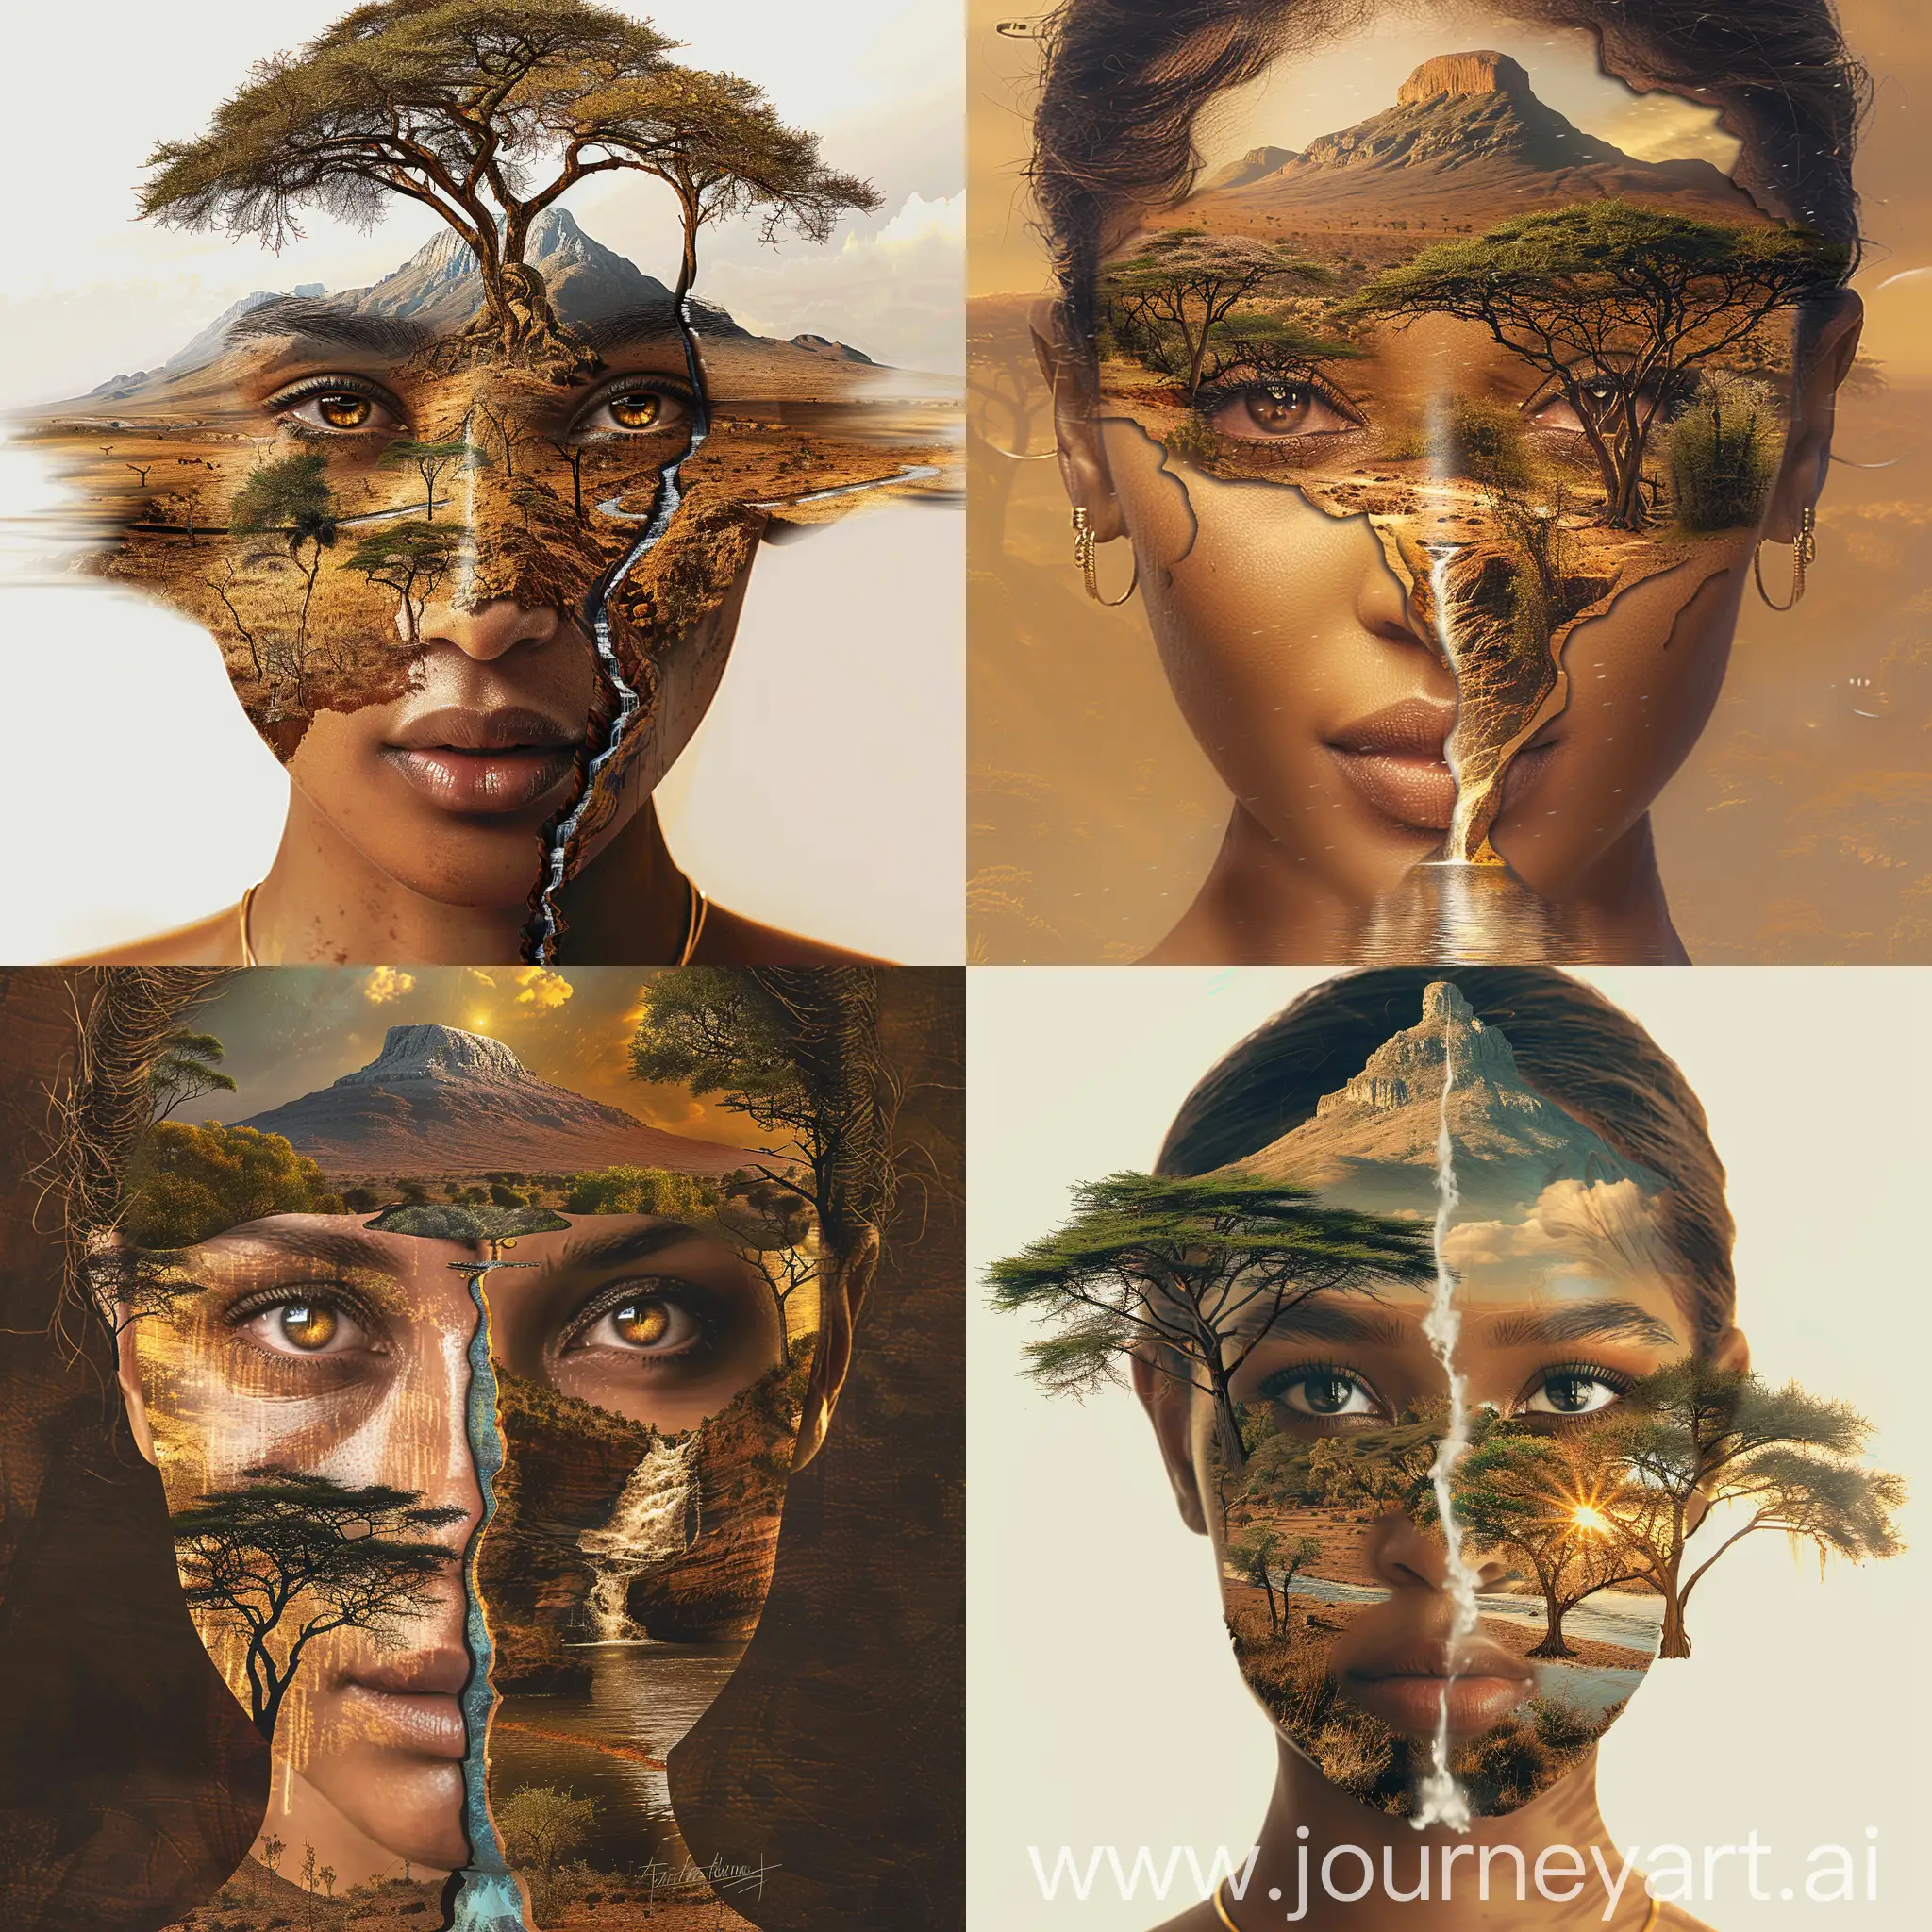 Original prompt: Generate a highly detailed digital painting of a powerful portrait of a woman. Her face should merge seamlessly with a stunning African savannah landscape. The woman's forehead and eyes should transition into a mountain peak, with a river flowing from the mountain across her cheek, turning into a serene river below. Trees native to the savannah should be reflected on her skin, giving the illusion that they are part of her face. The color scheme should be warm, dominated by earthy tones that reflect the savannah, with a realistic and slightly surreal touch. Her gaze should be direct and captivating, with striking eyes that resemble the sun's reflection on water. She should be adorned with simple but elegant gold jewelry, complementing the natural tones of the scenery